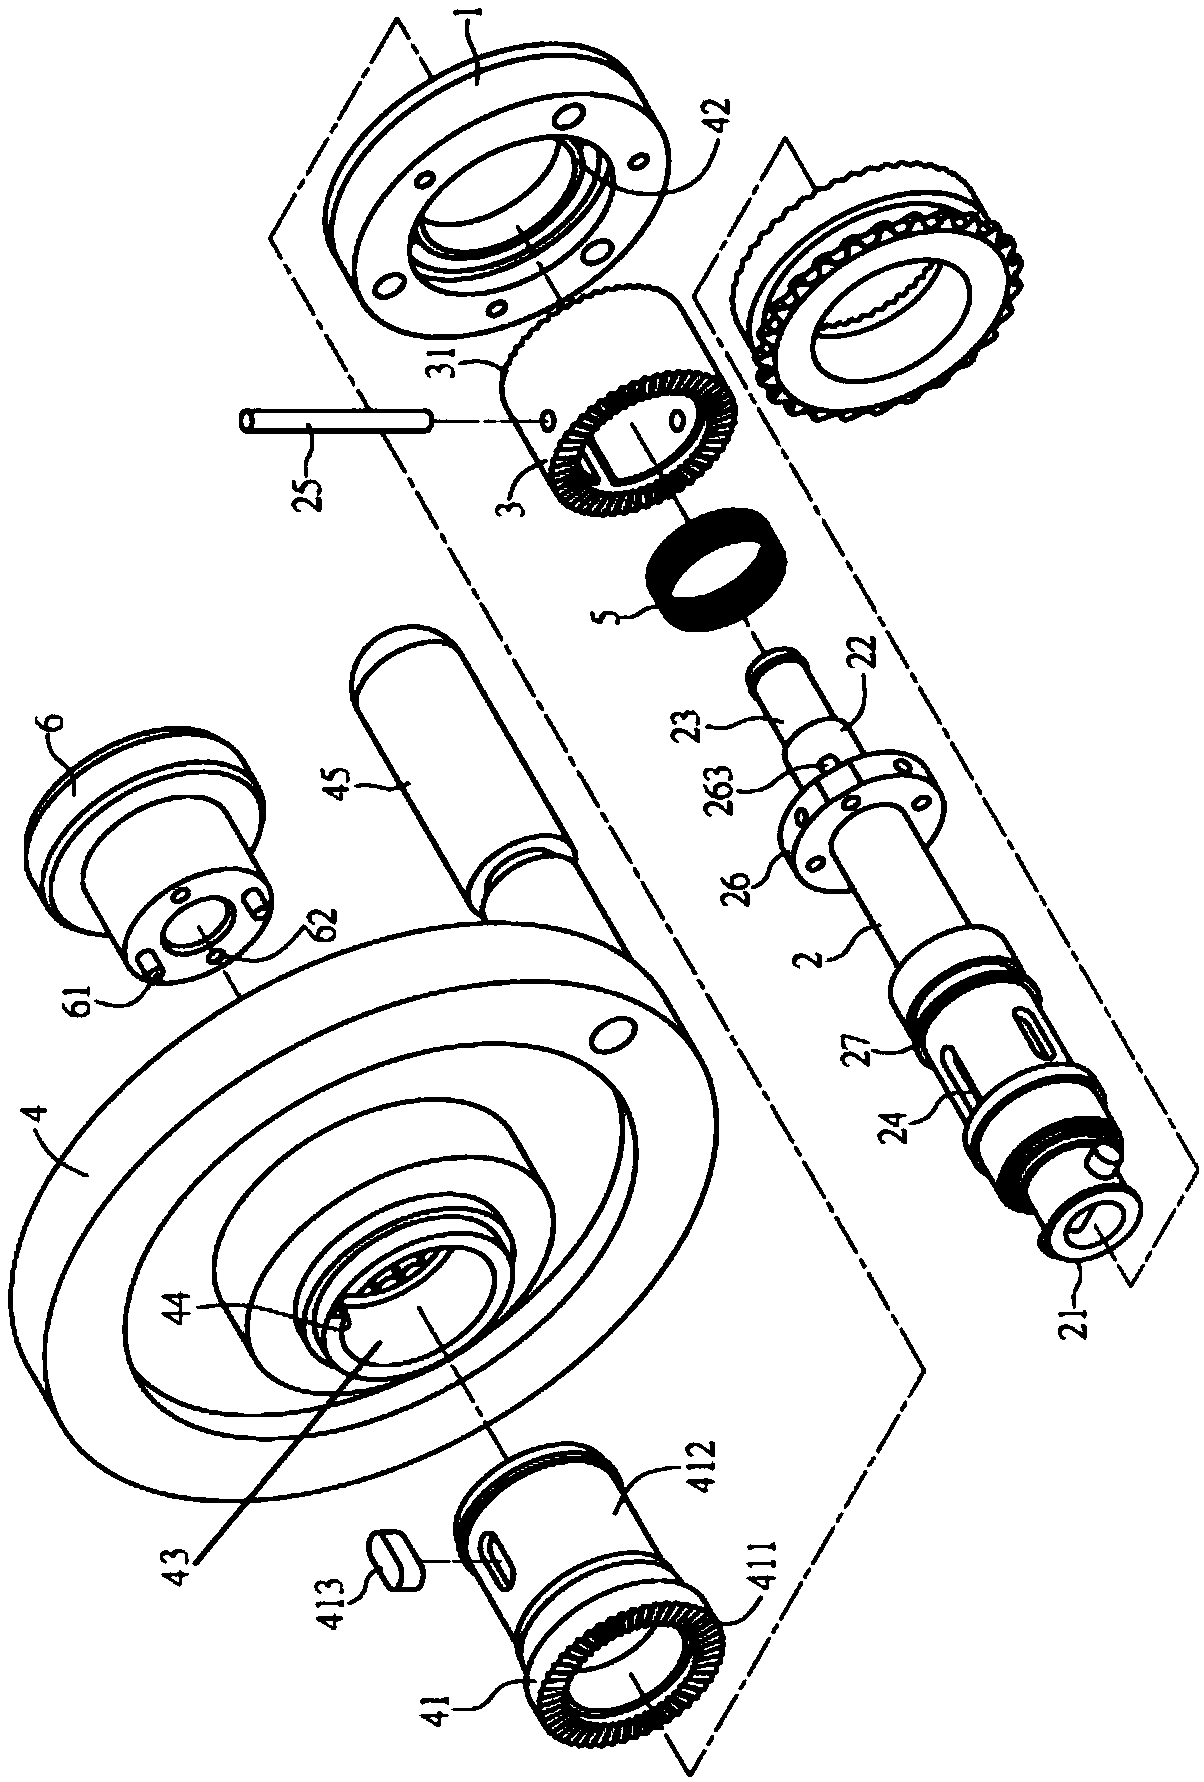 Disengaging and engaging mechanism for control grip of machine tool